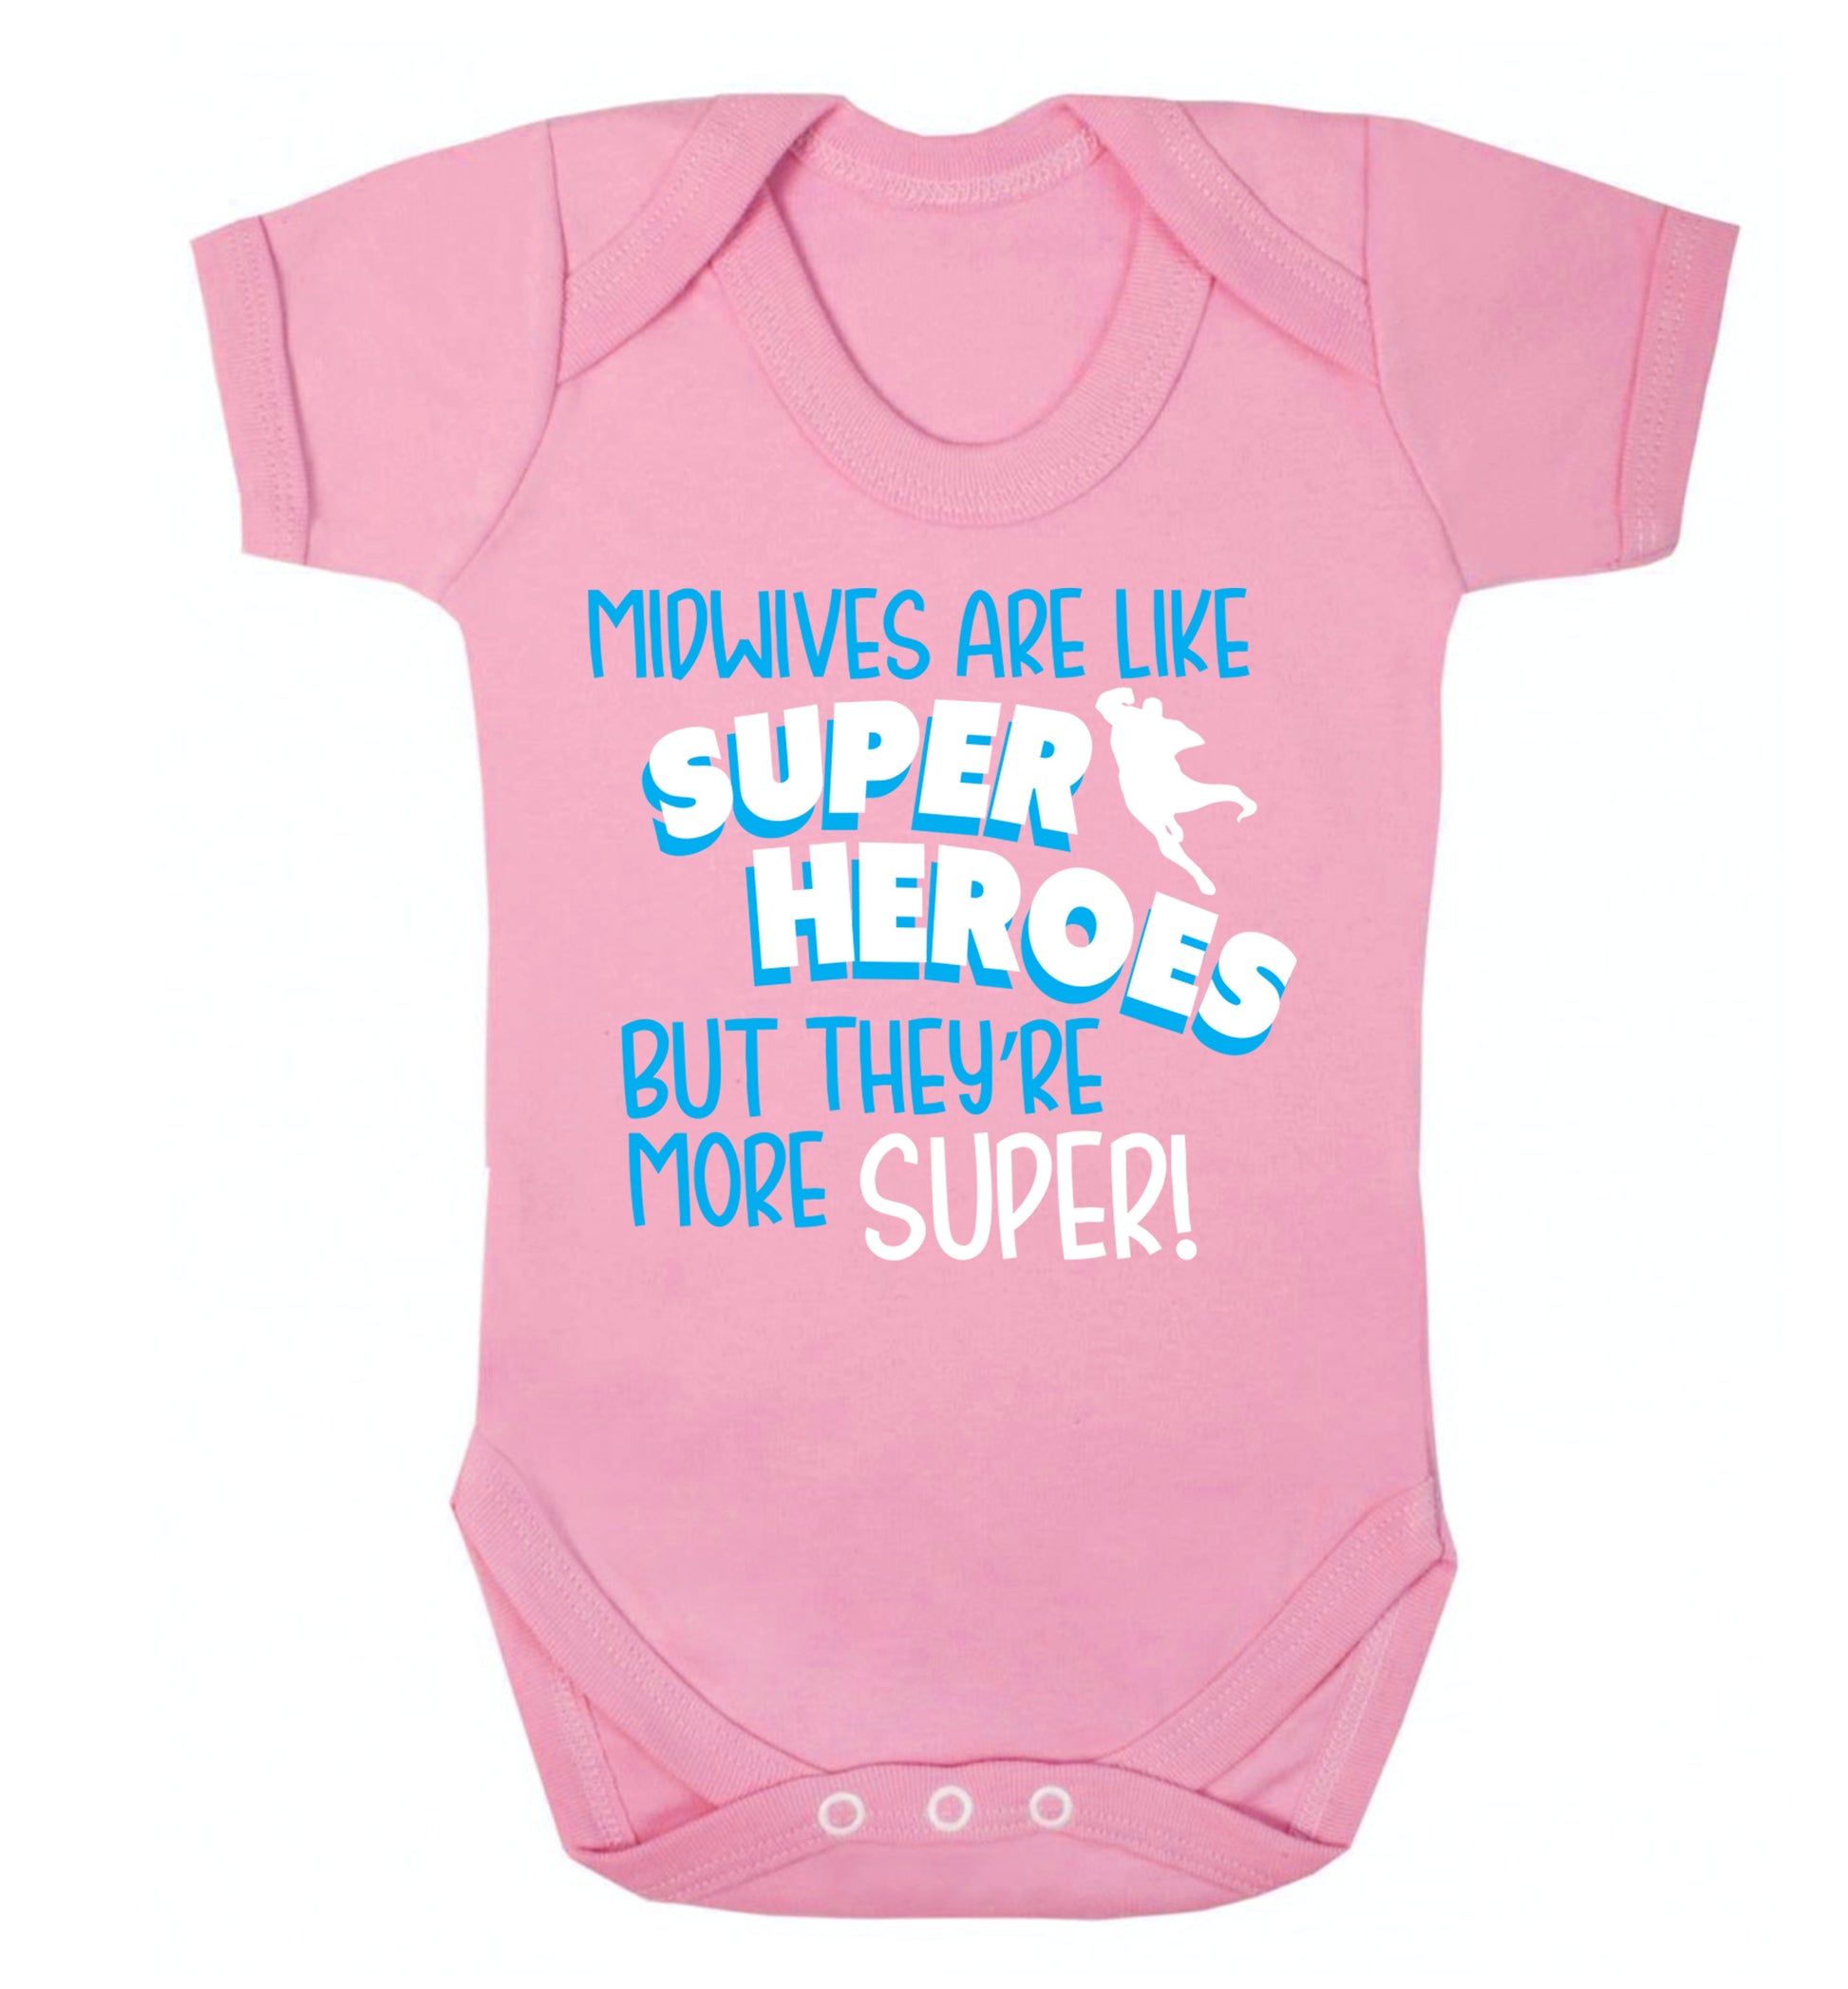 Midwives are like superheros but they're more super Baby Vest pale pink 18-24 months